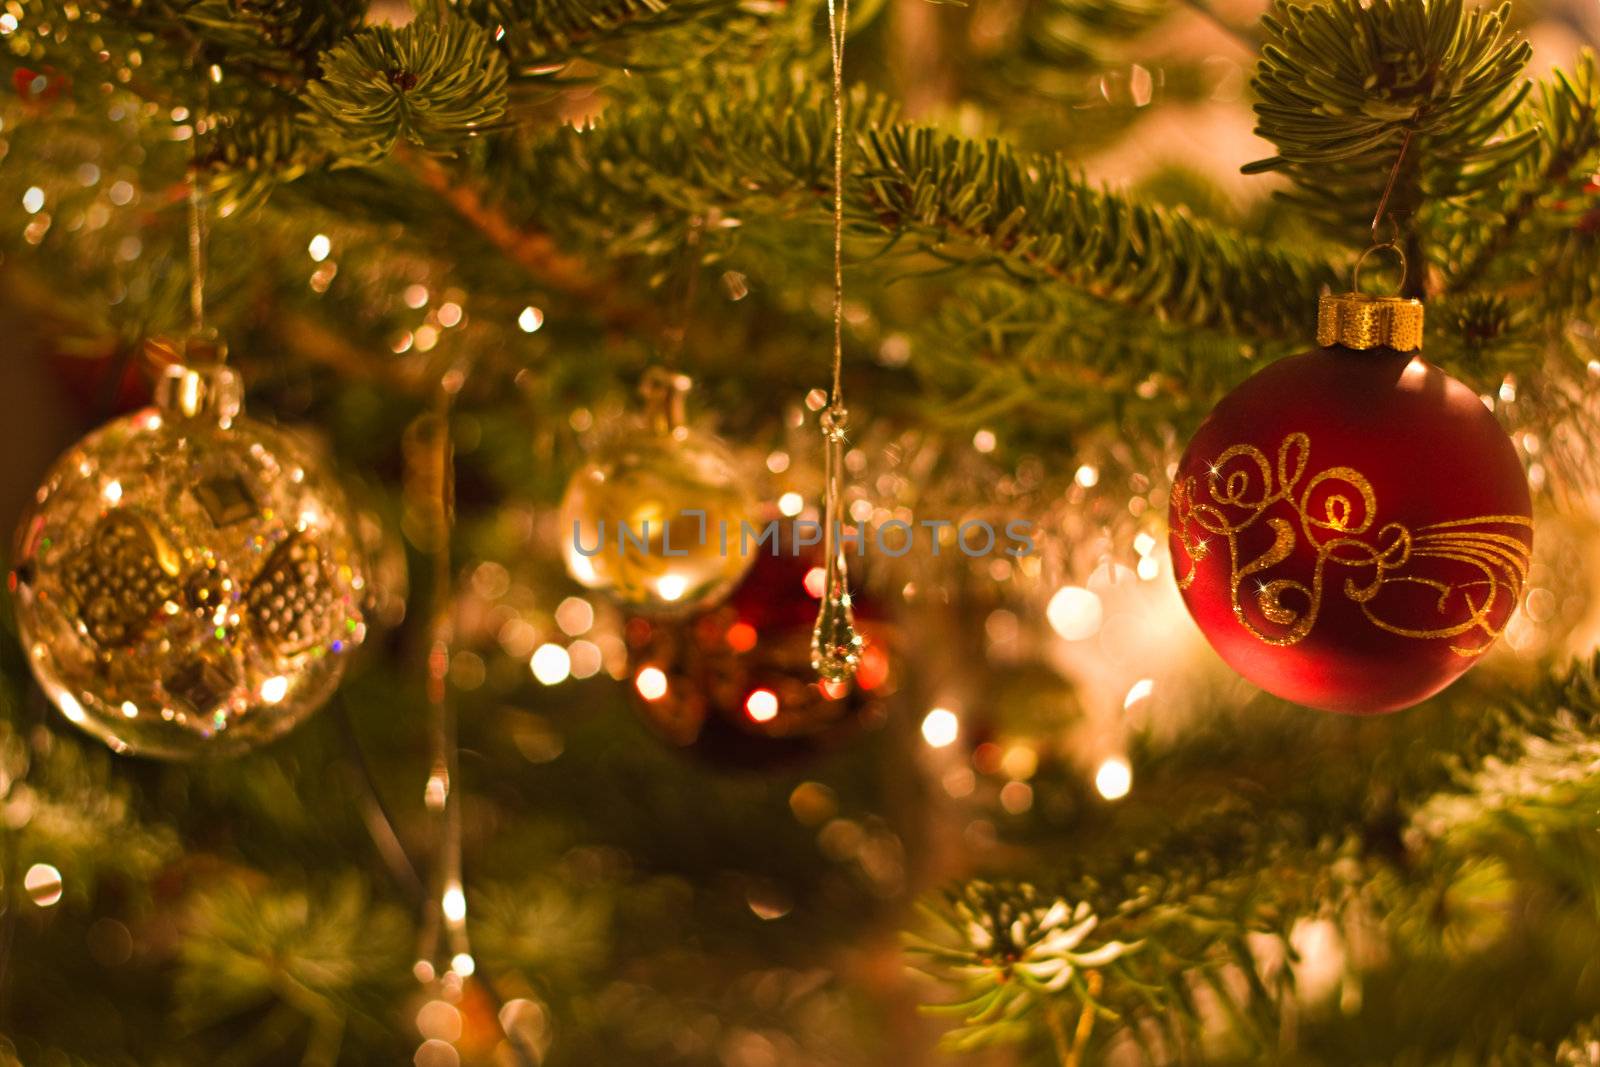 Decoration in christmas tree with balls and lights red and silver - shallow dof